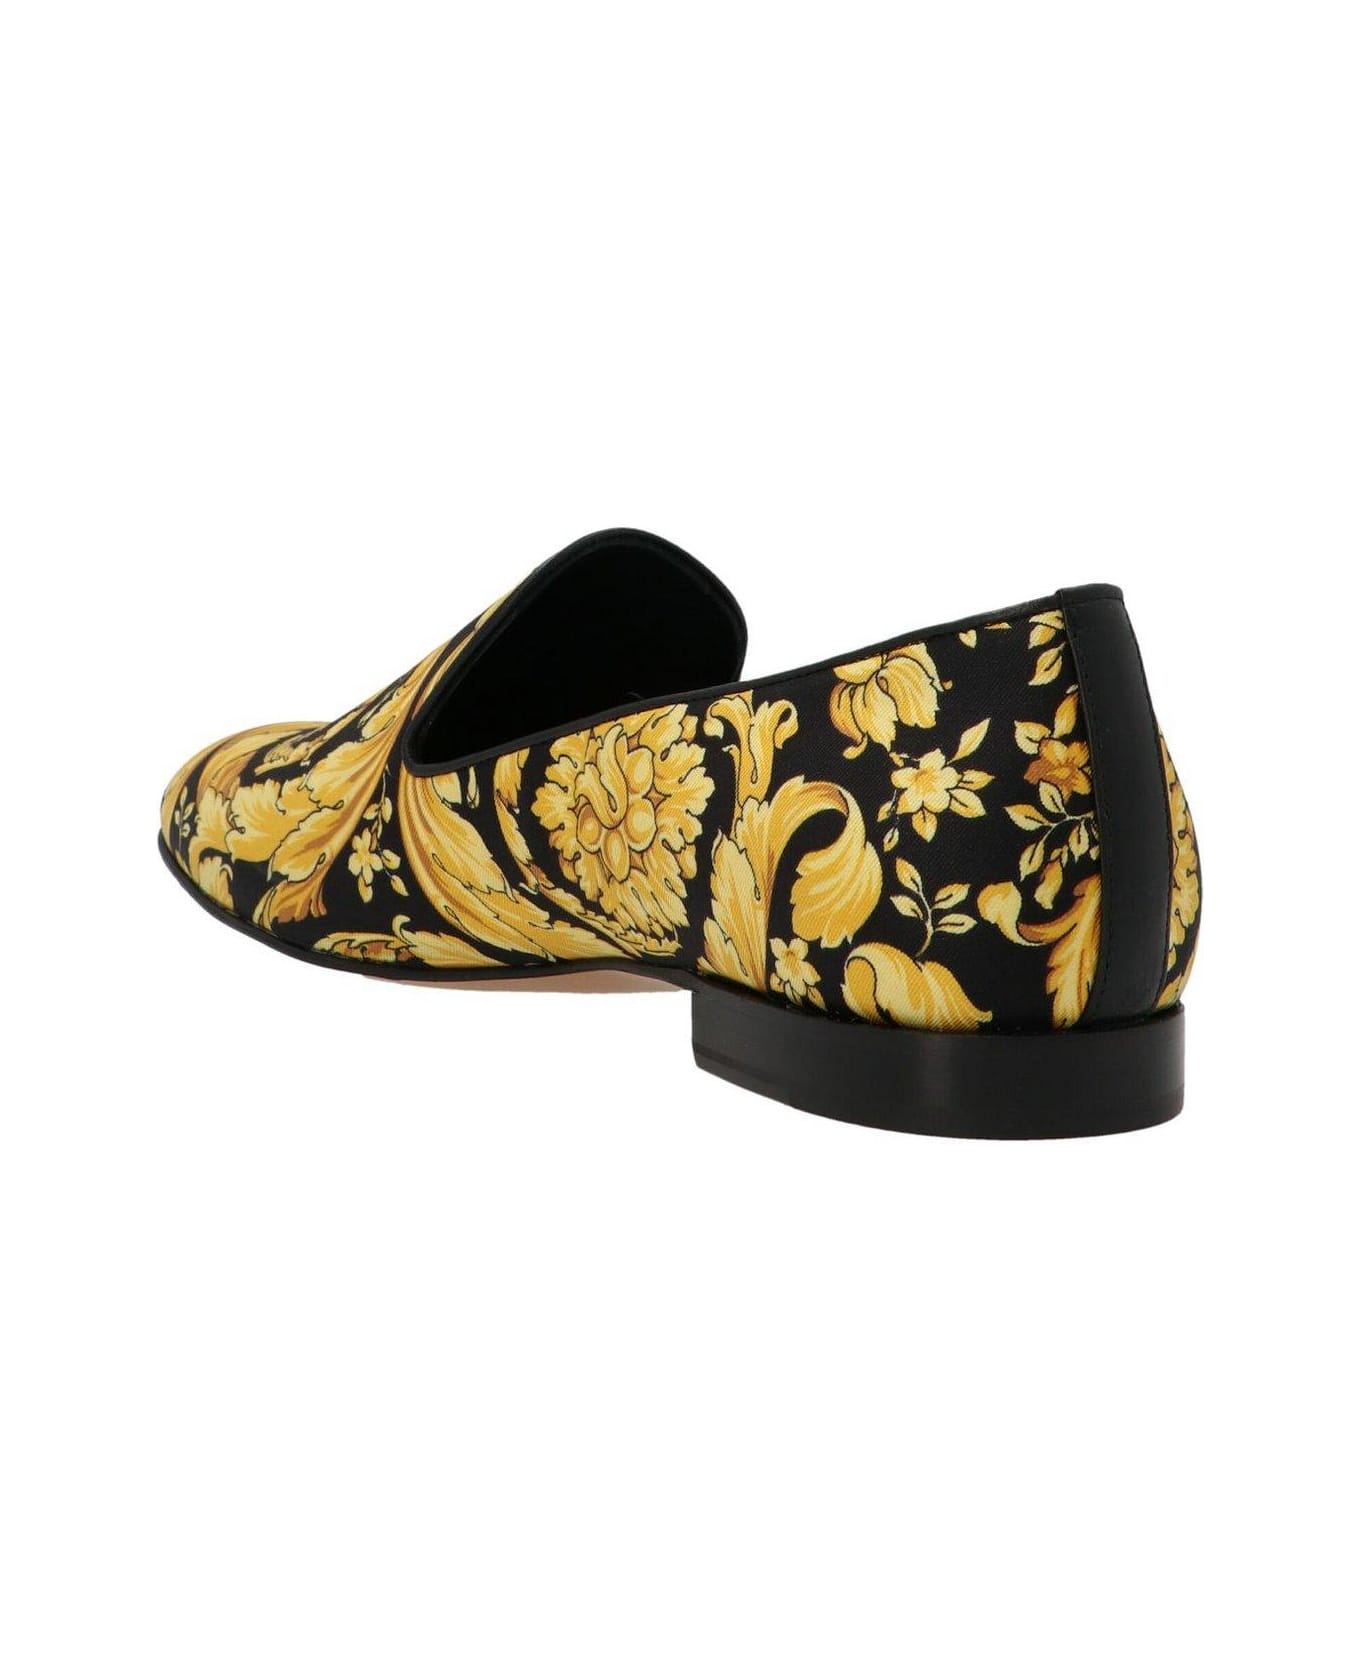 Versace Baroque Pattern Pointed Toe Loafers - YELLOW/BLACK